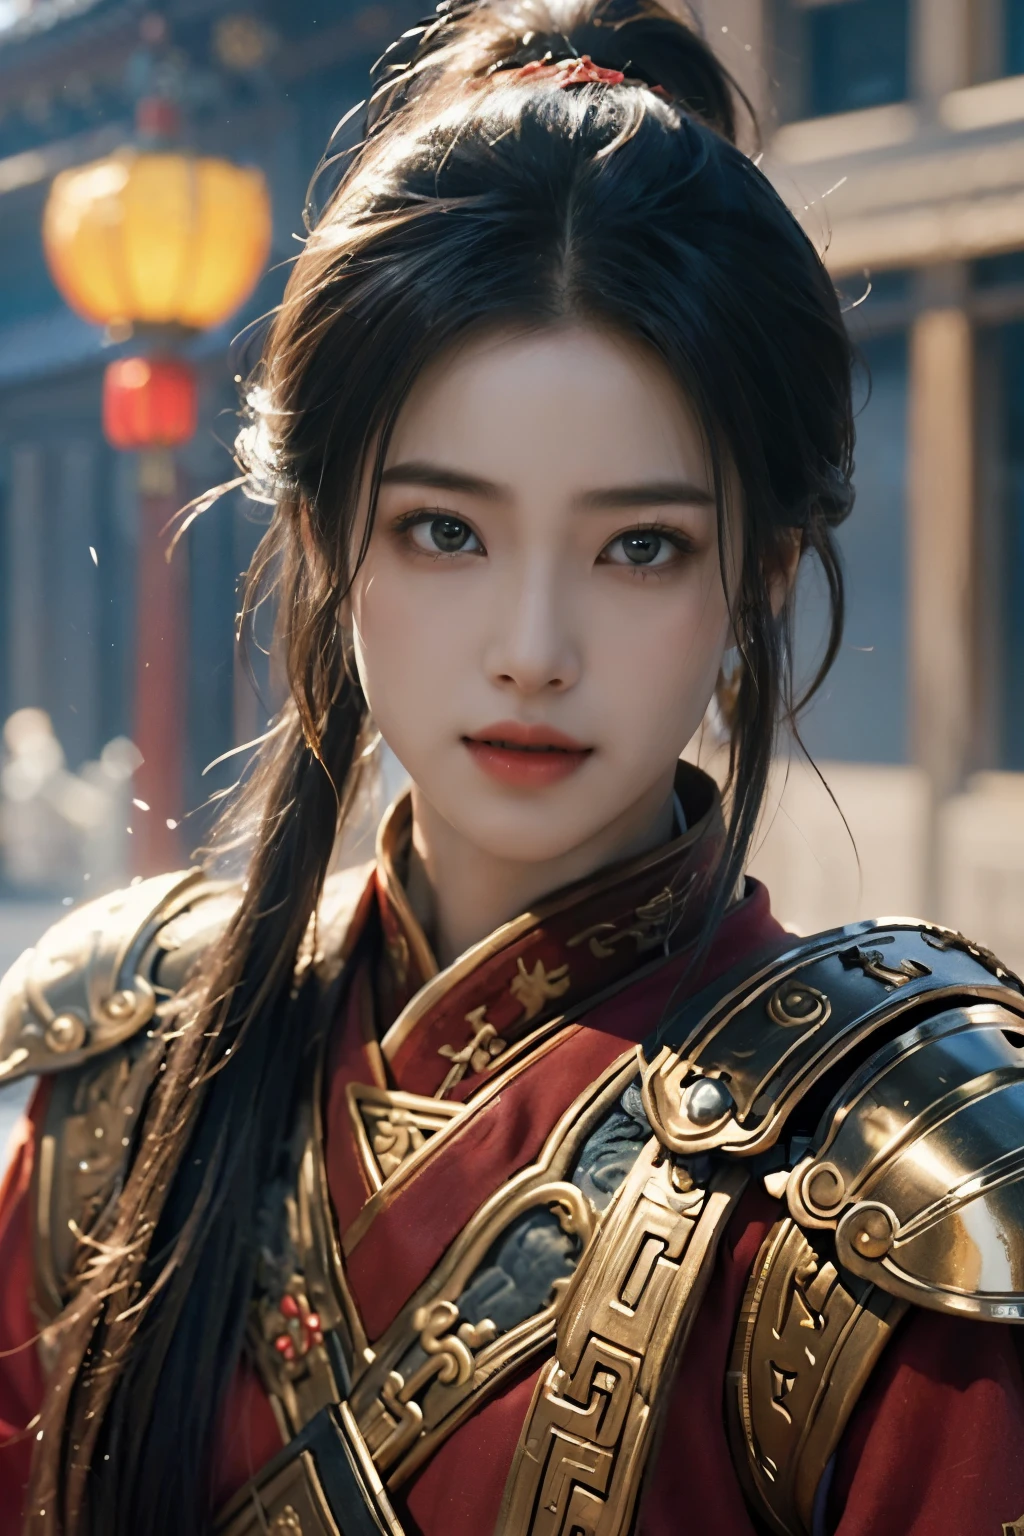 Game art，The best picture quality，Highest resolution，8K，(A bust photograph)，(Portrait from bust:1.5)，(Head close-up)，(Rule of thirds)，Unreal Engine 5 rendering works， (The Girl of the Future)，(Female Warrior)， 
20-year-old girl，(The warrior in ancient China)，(Short ponytail hairstyle)，An eye rich in detail，(Big breasts)，Elegant and noble，indifferent，(Smile)，
(The costume of Chinese swordsman elements，Costumes of ancient Chinese characters，Armor，The costume is red and gold，Heavy armour，Joint Armor)，(Chinese Hanfu:1.3)，figure，Fantasy style，
Photo poses，Field background，Movie lights，Ray tracing，Game CG，((3D Unreal Engine))，oc rendering reflection pattern